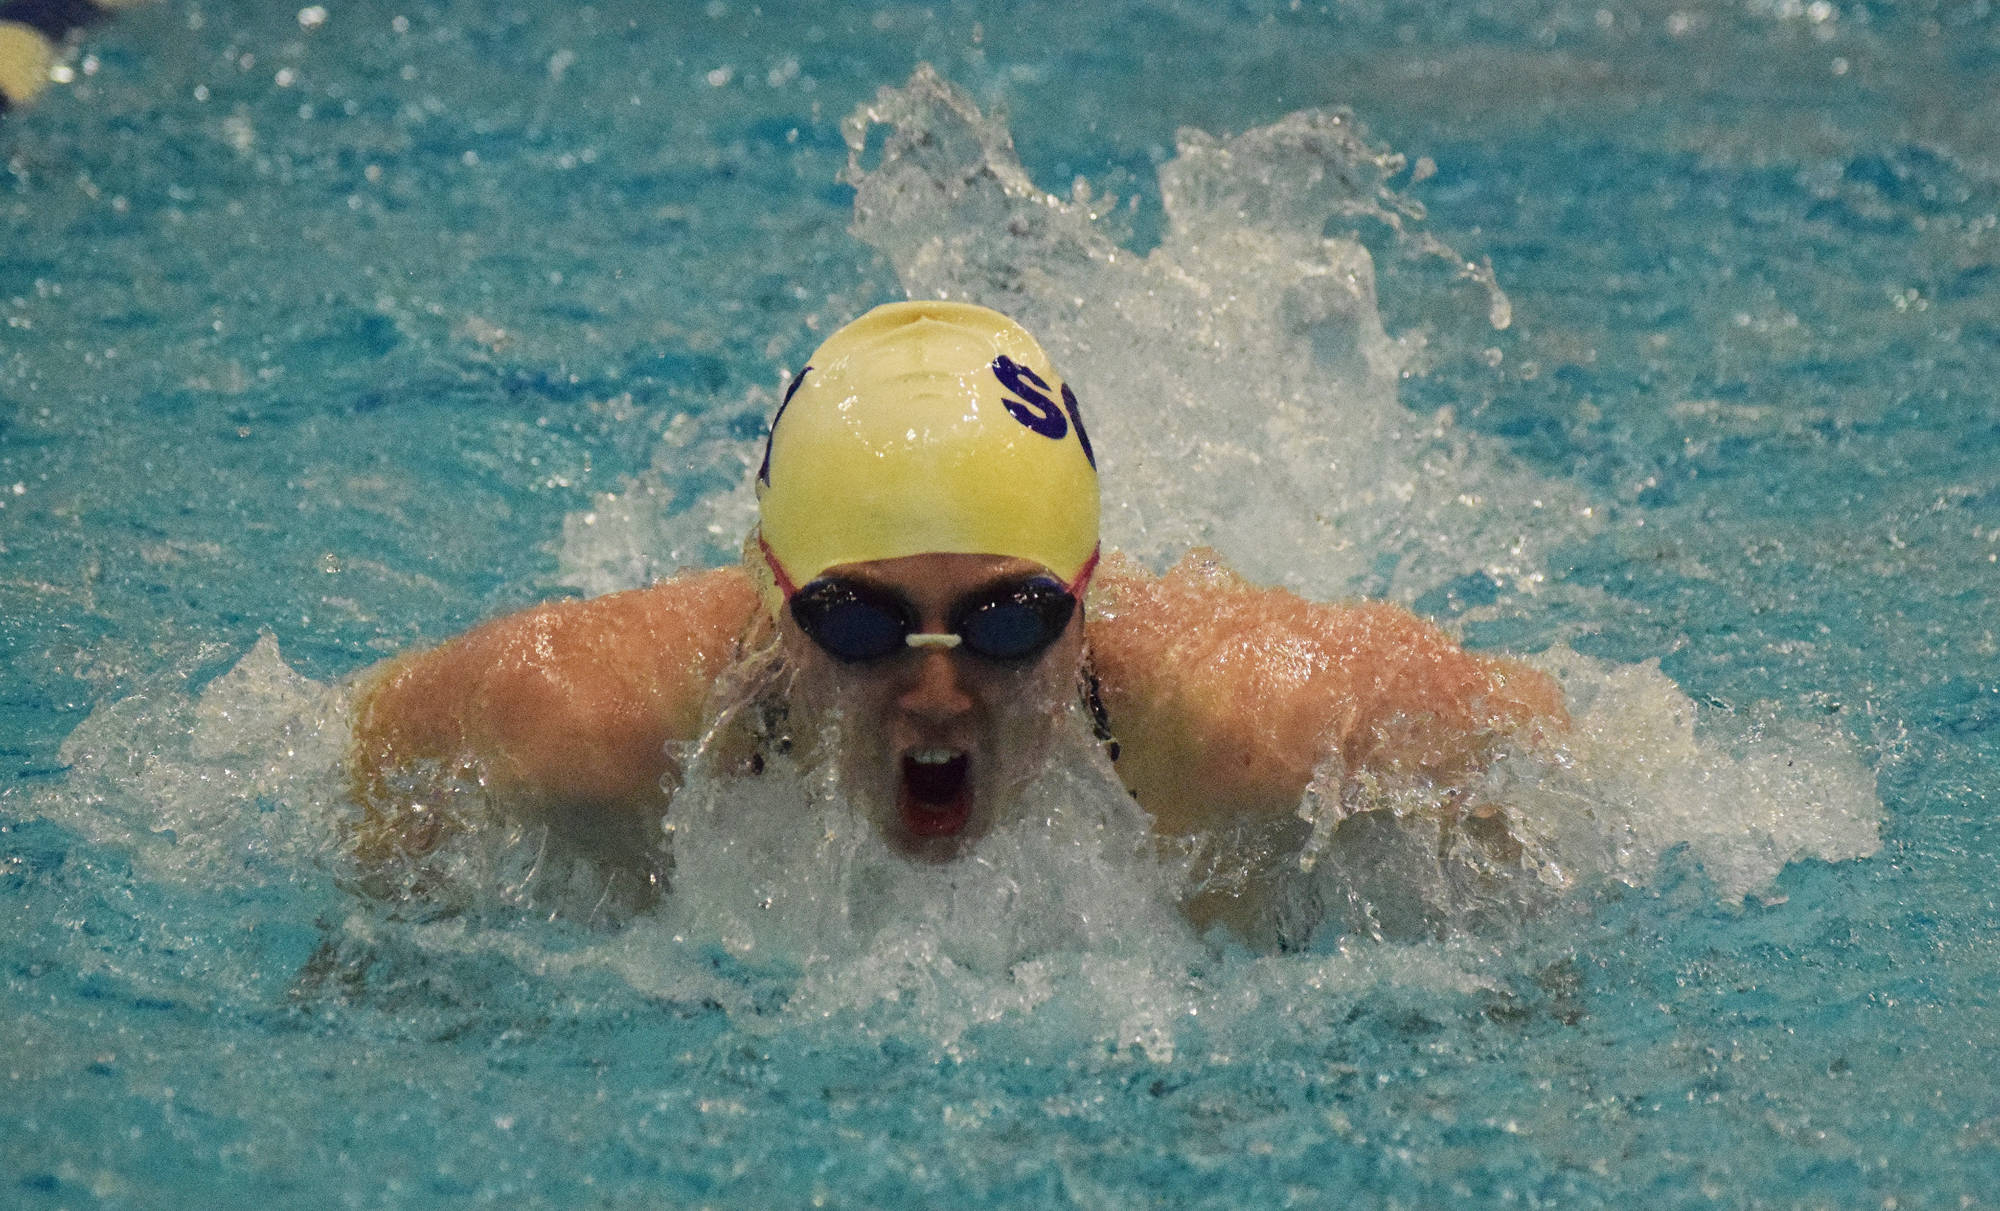 Soldotna’s Darby McMillan races in the girls 100-yard butterfly at the SoHi dual meet Friday, Oct. 12, 2018 at Soldotna High School in Soldotna, Alaska.